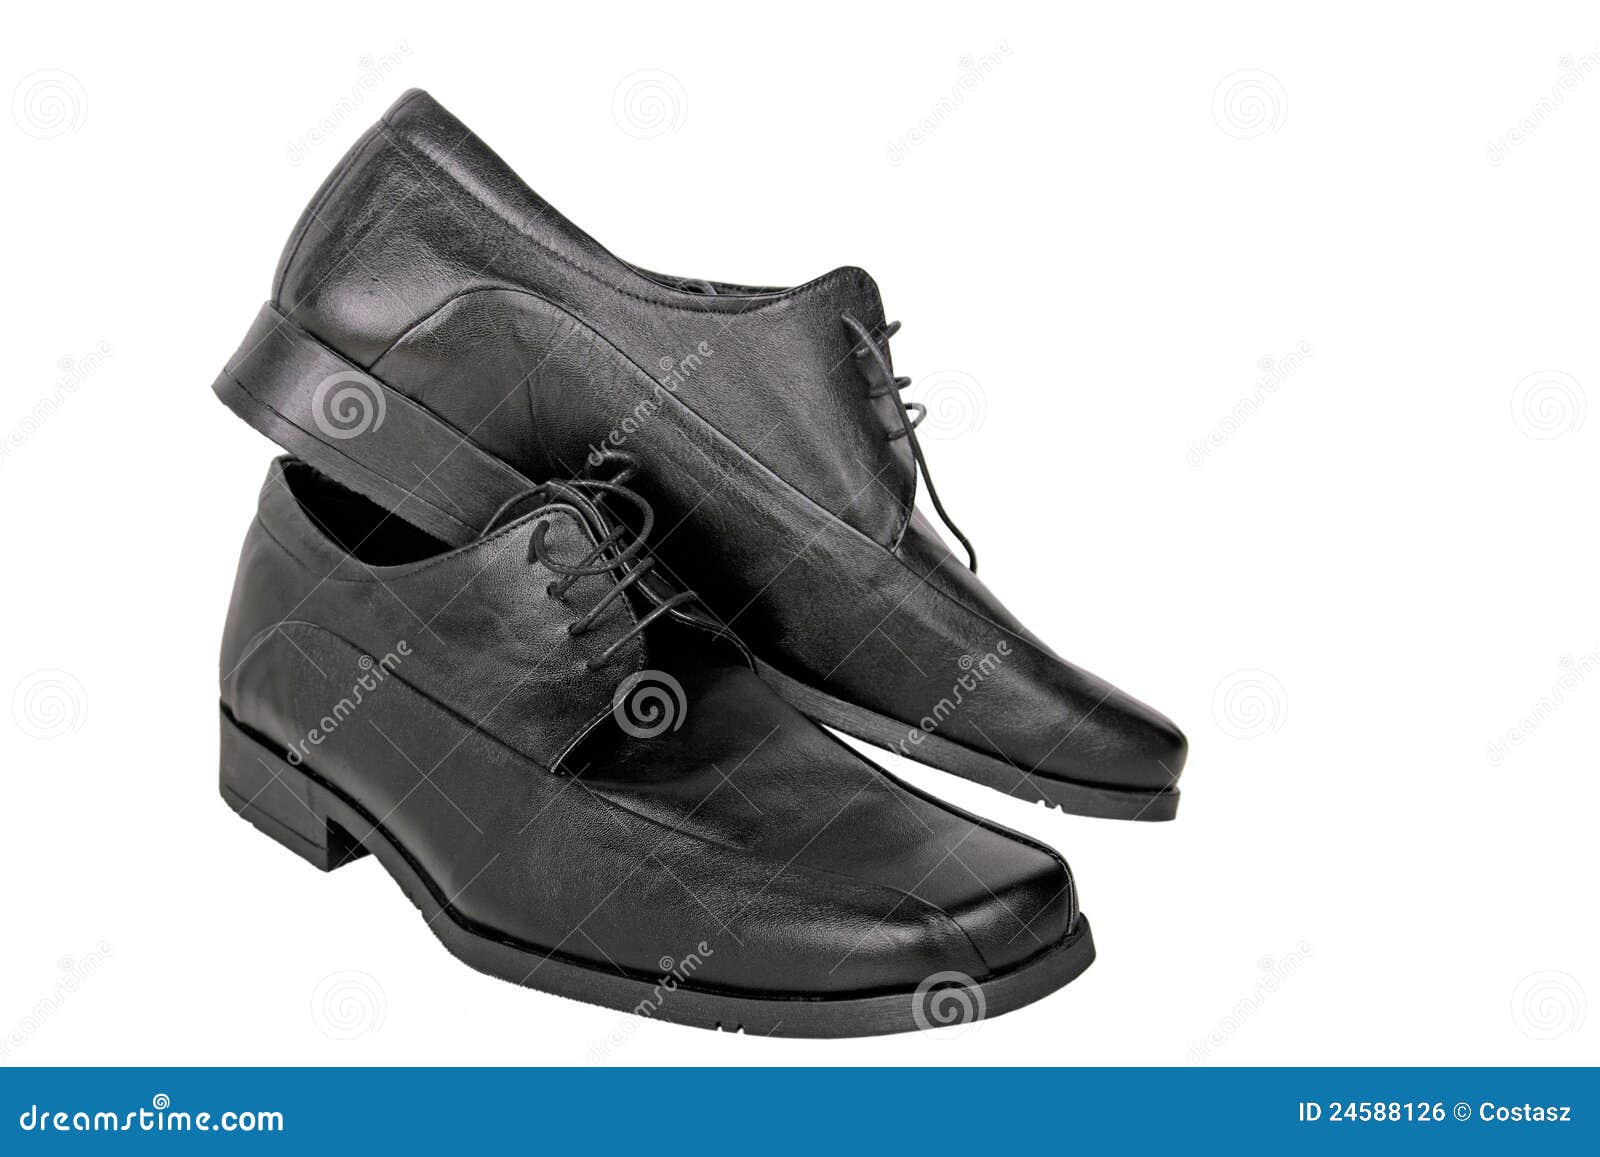 Leather shoes stock photo. Image of foot, pair, classic - 24588126